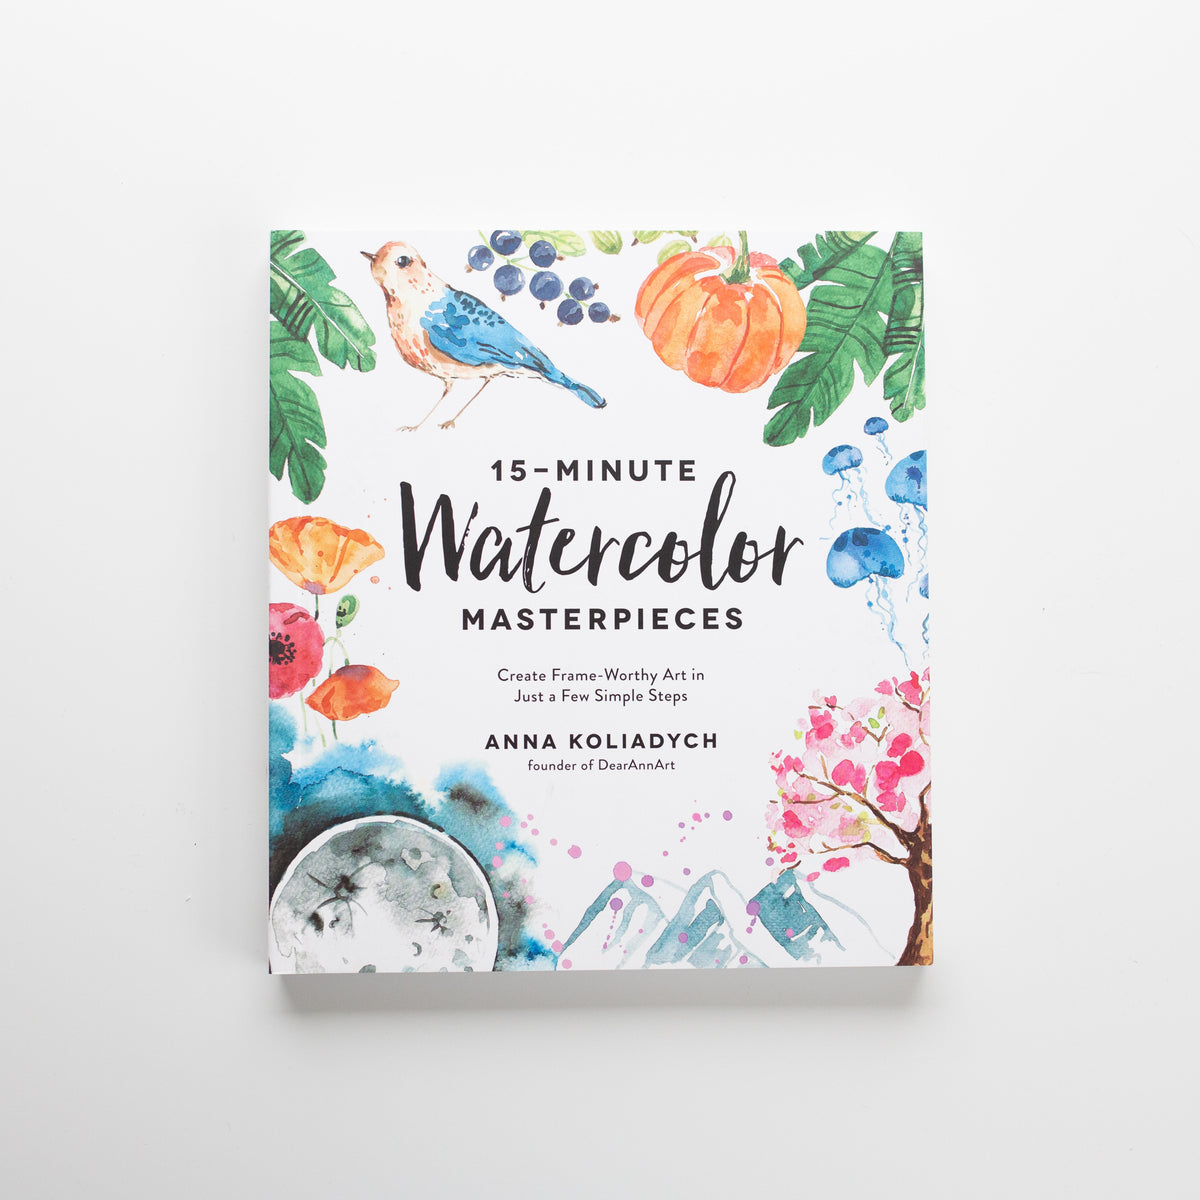 '15 Minute Watercolor Masterpieces' by Anna Koliadych